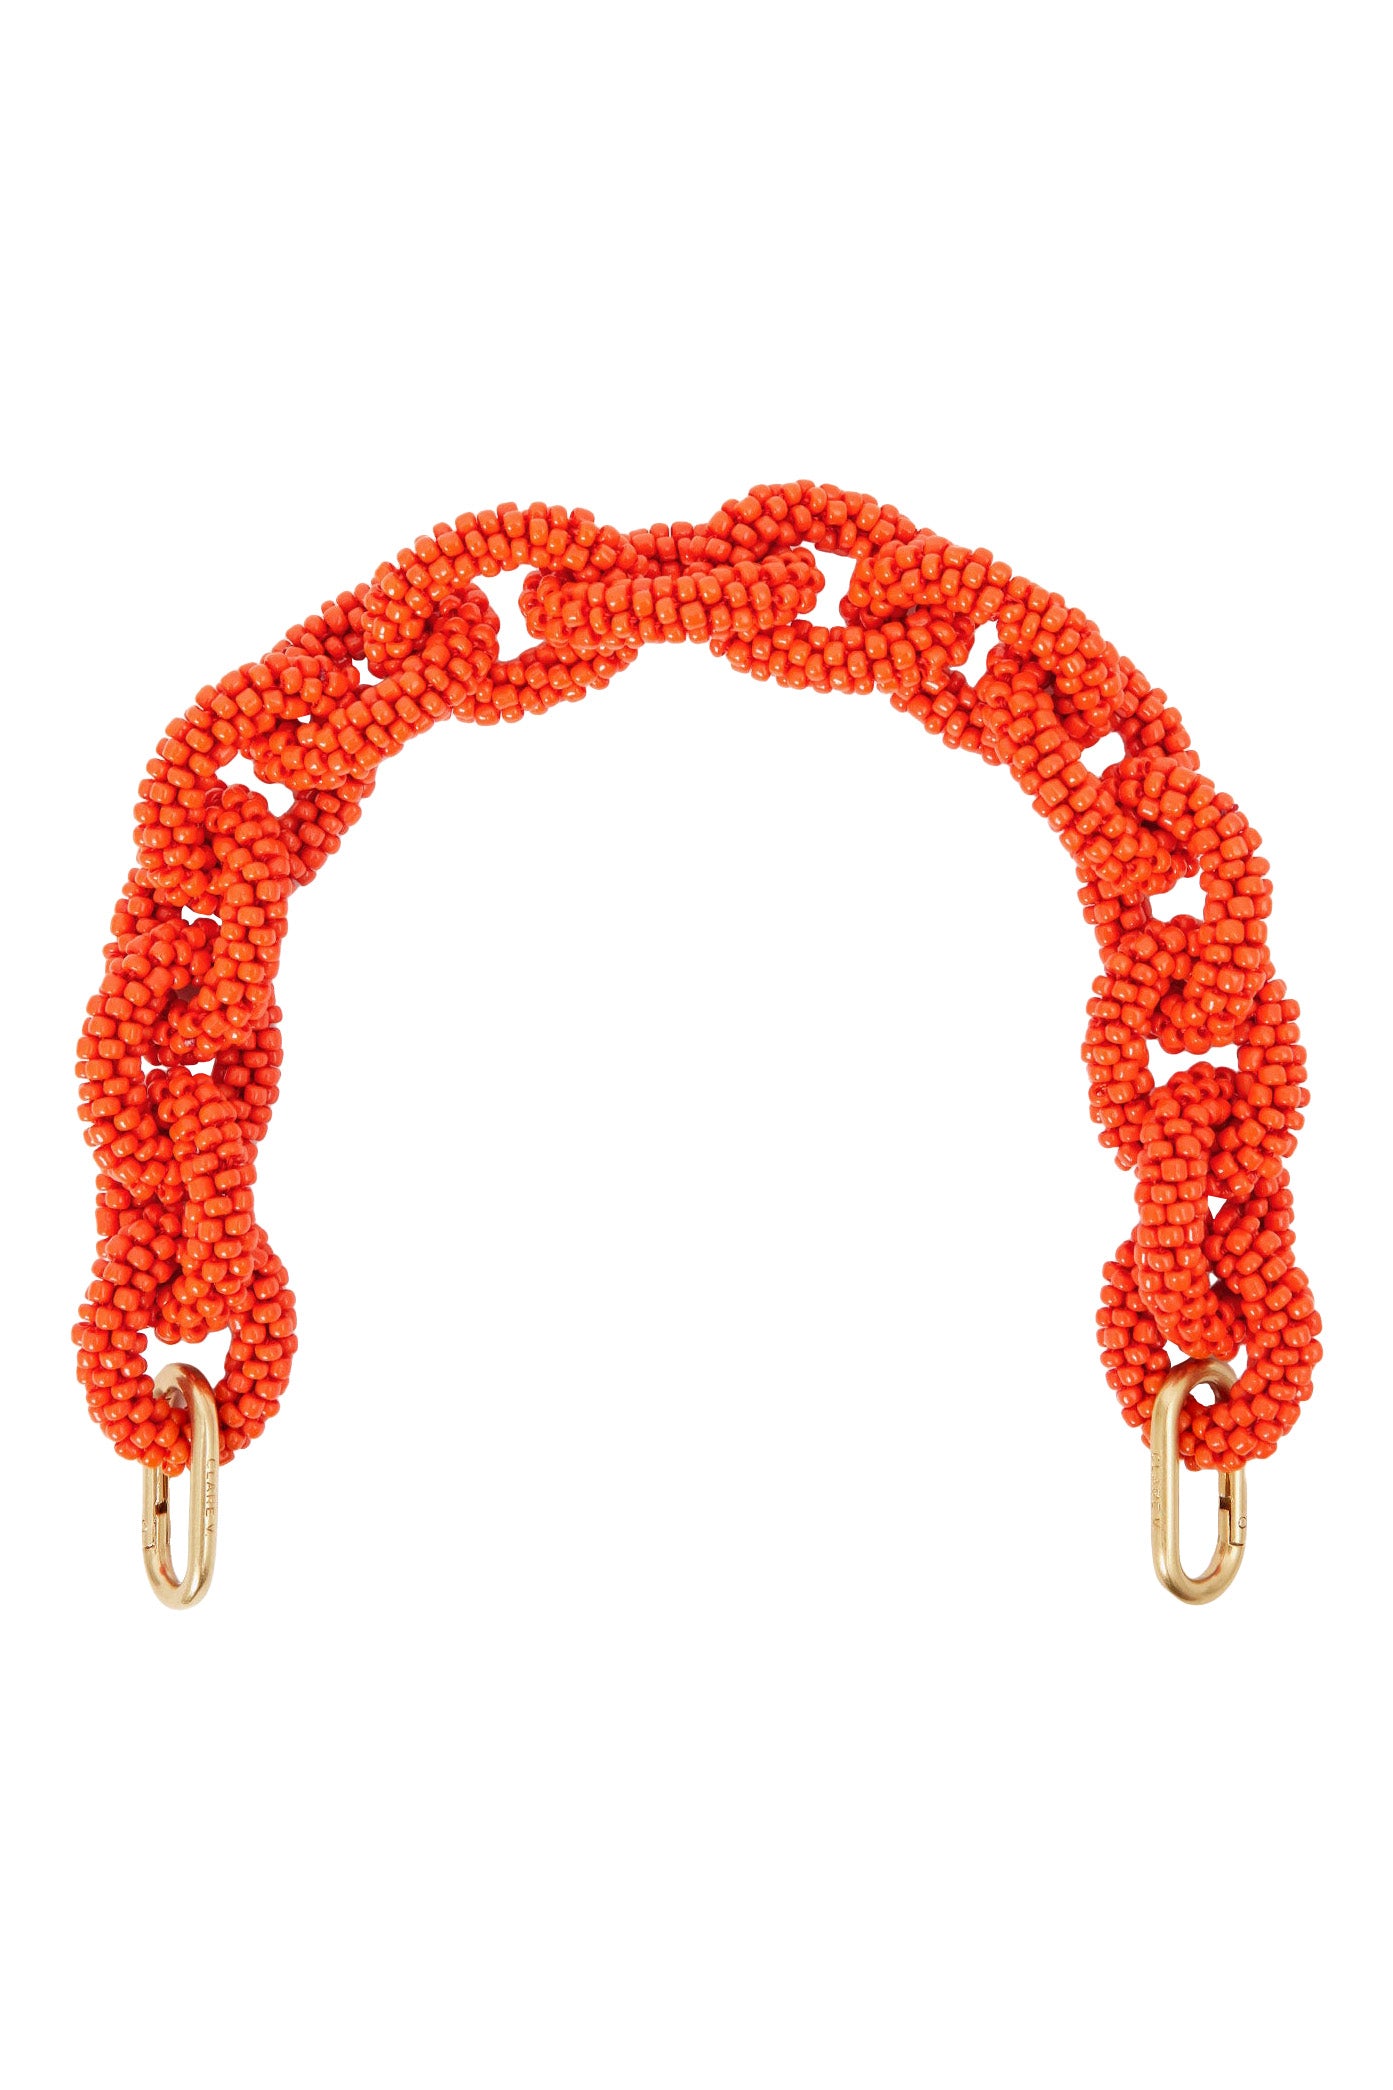 Clare V. Shortie Strap in Poppy Seed Bead Link